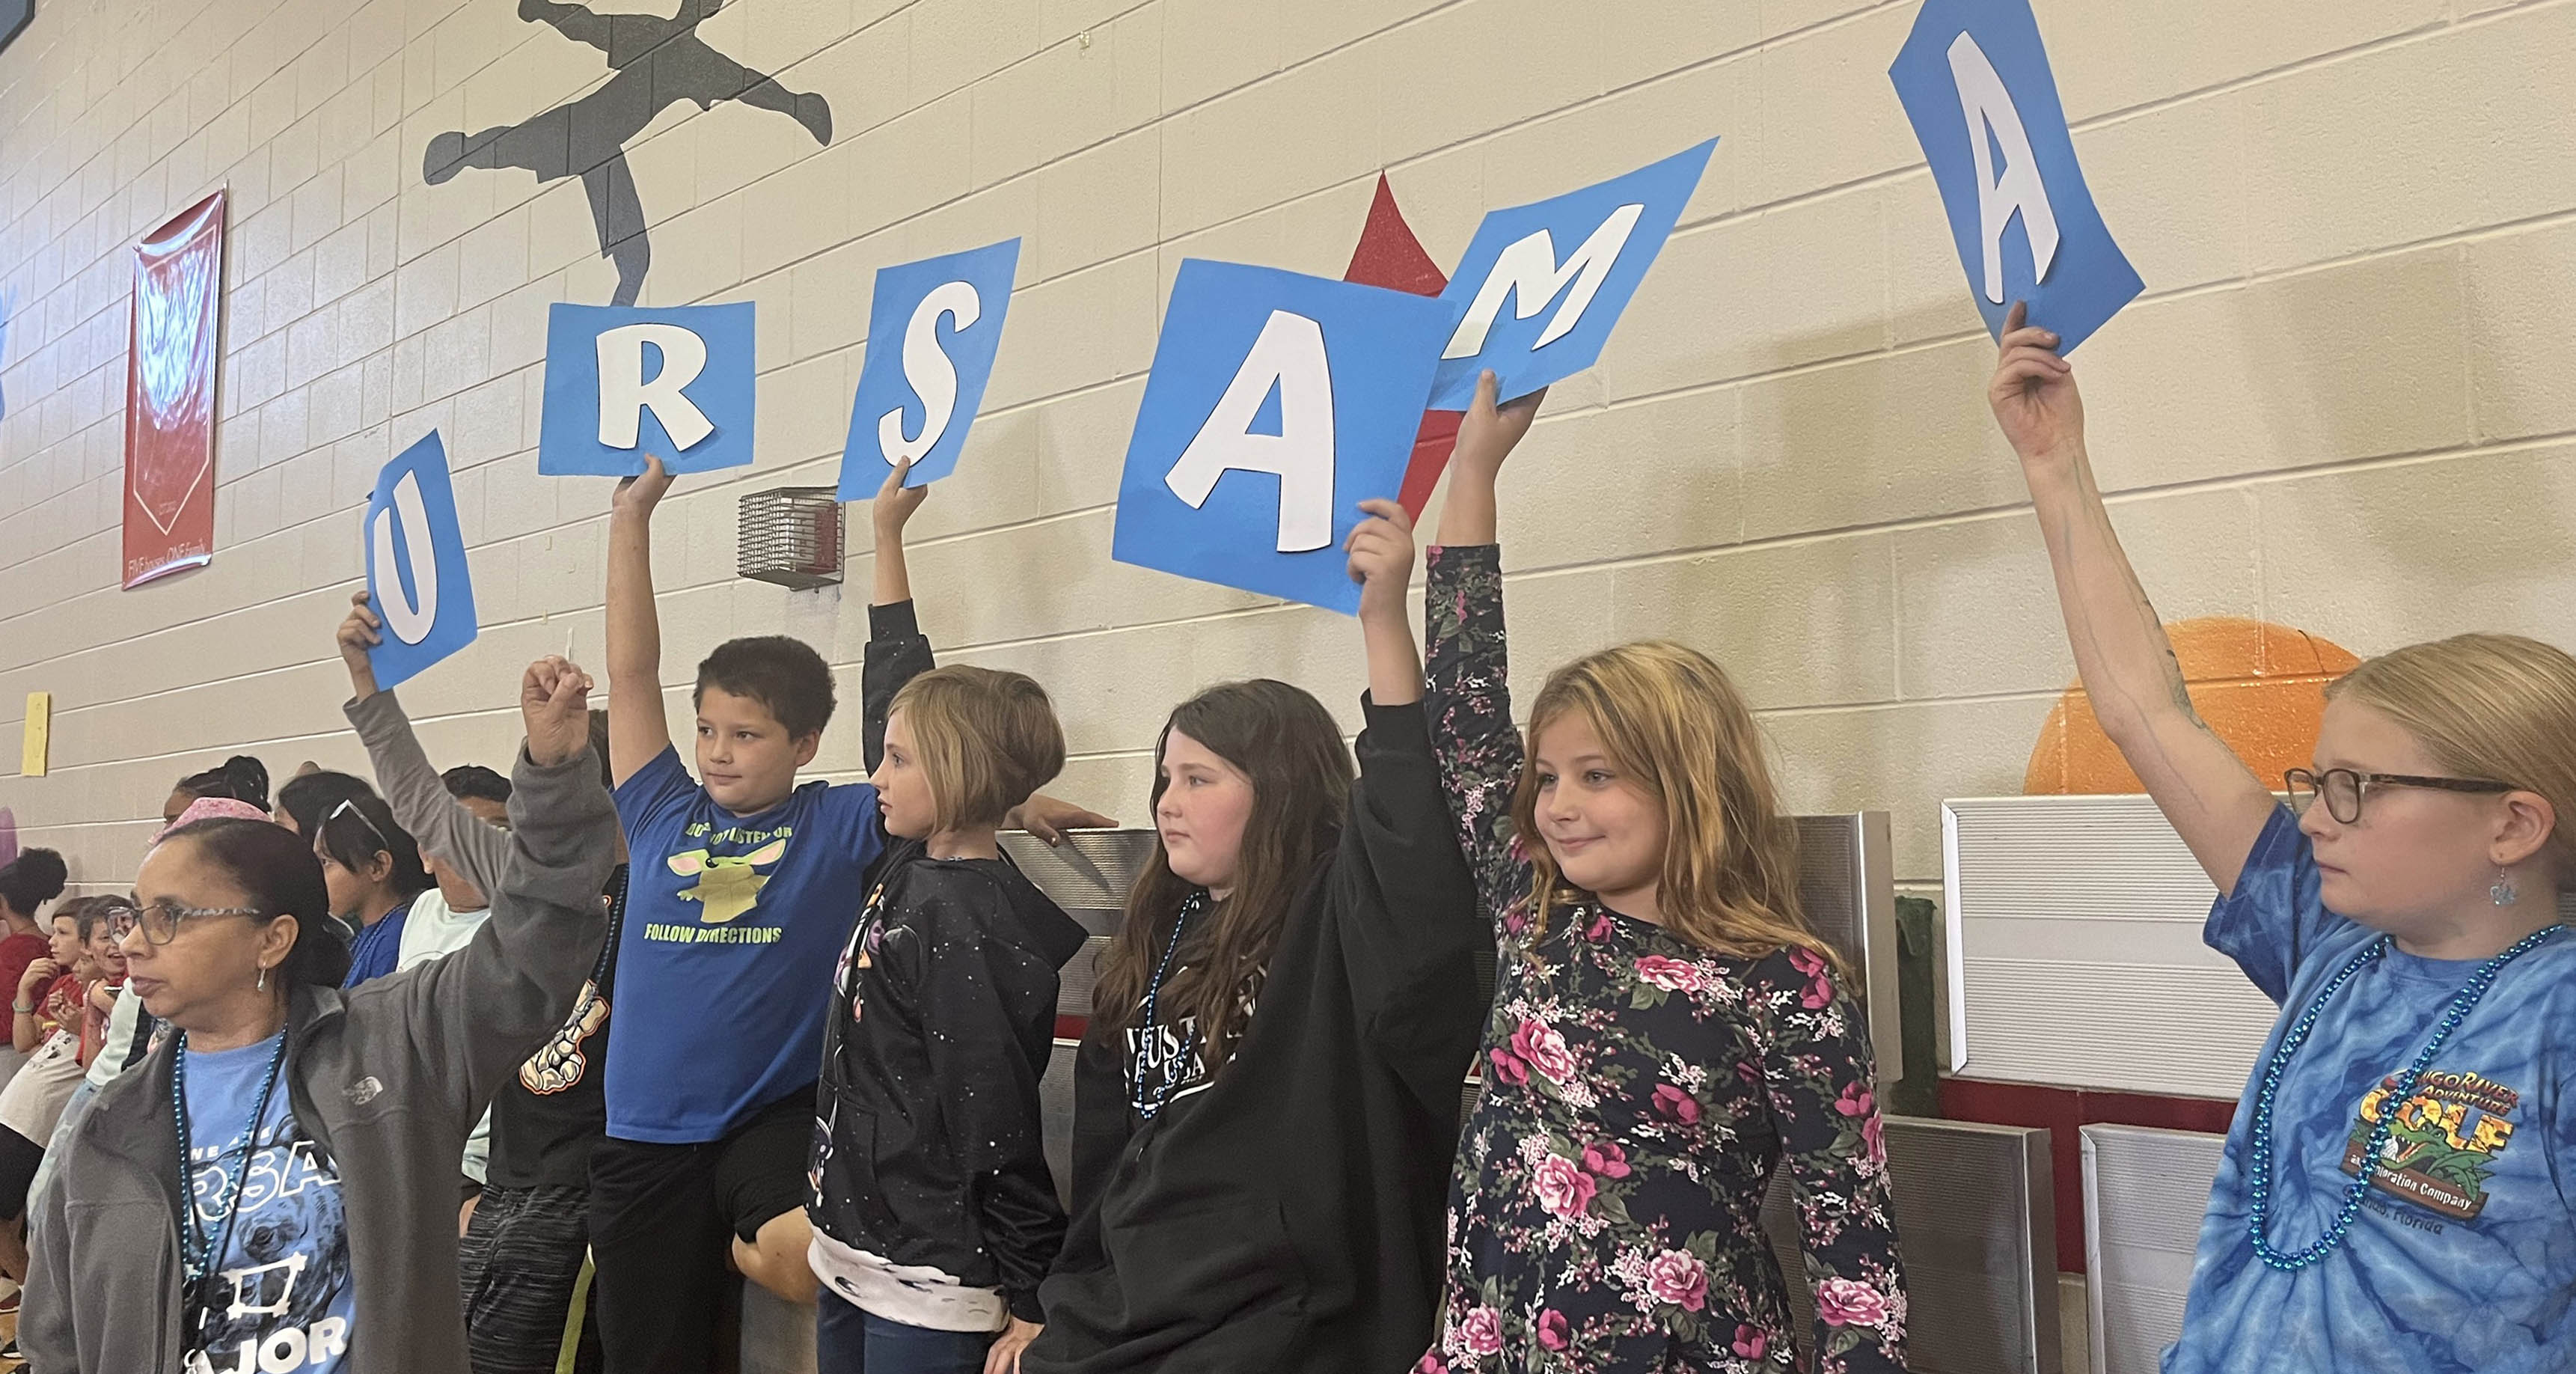 A group of students holding large letters in the gymnasium